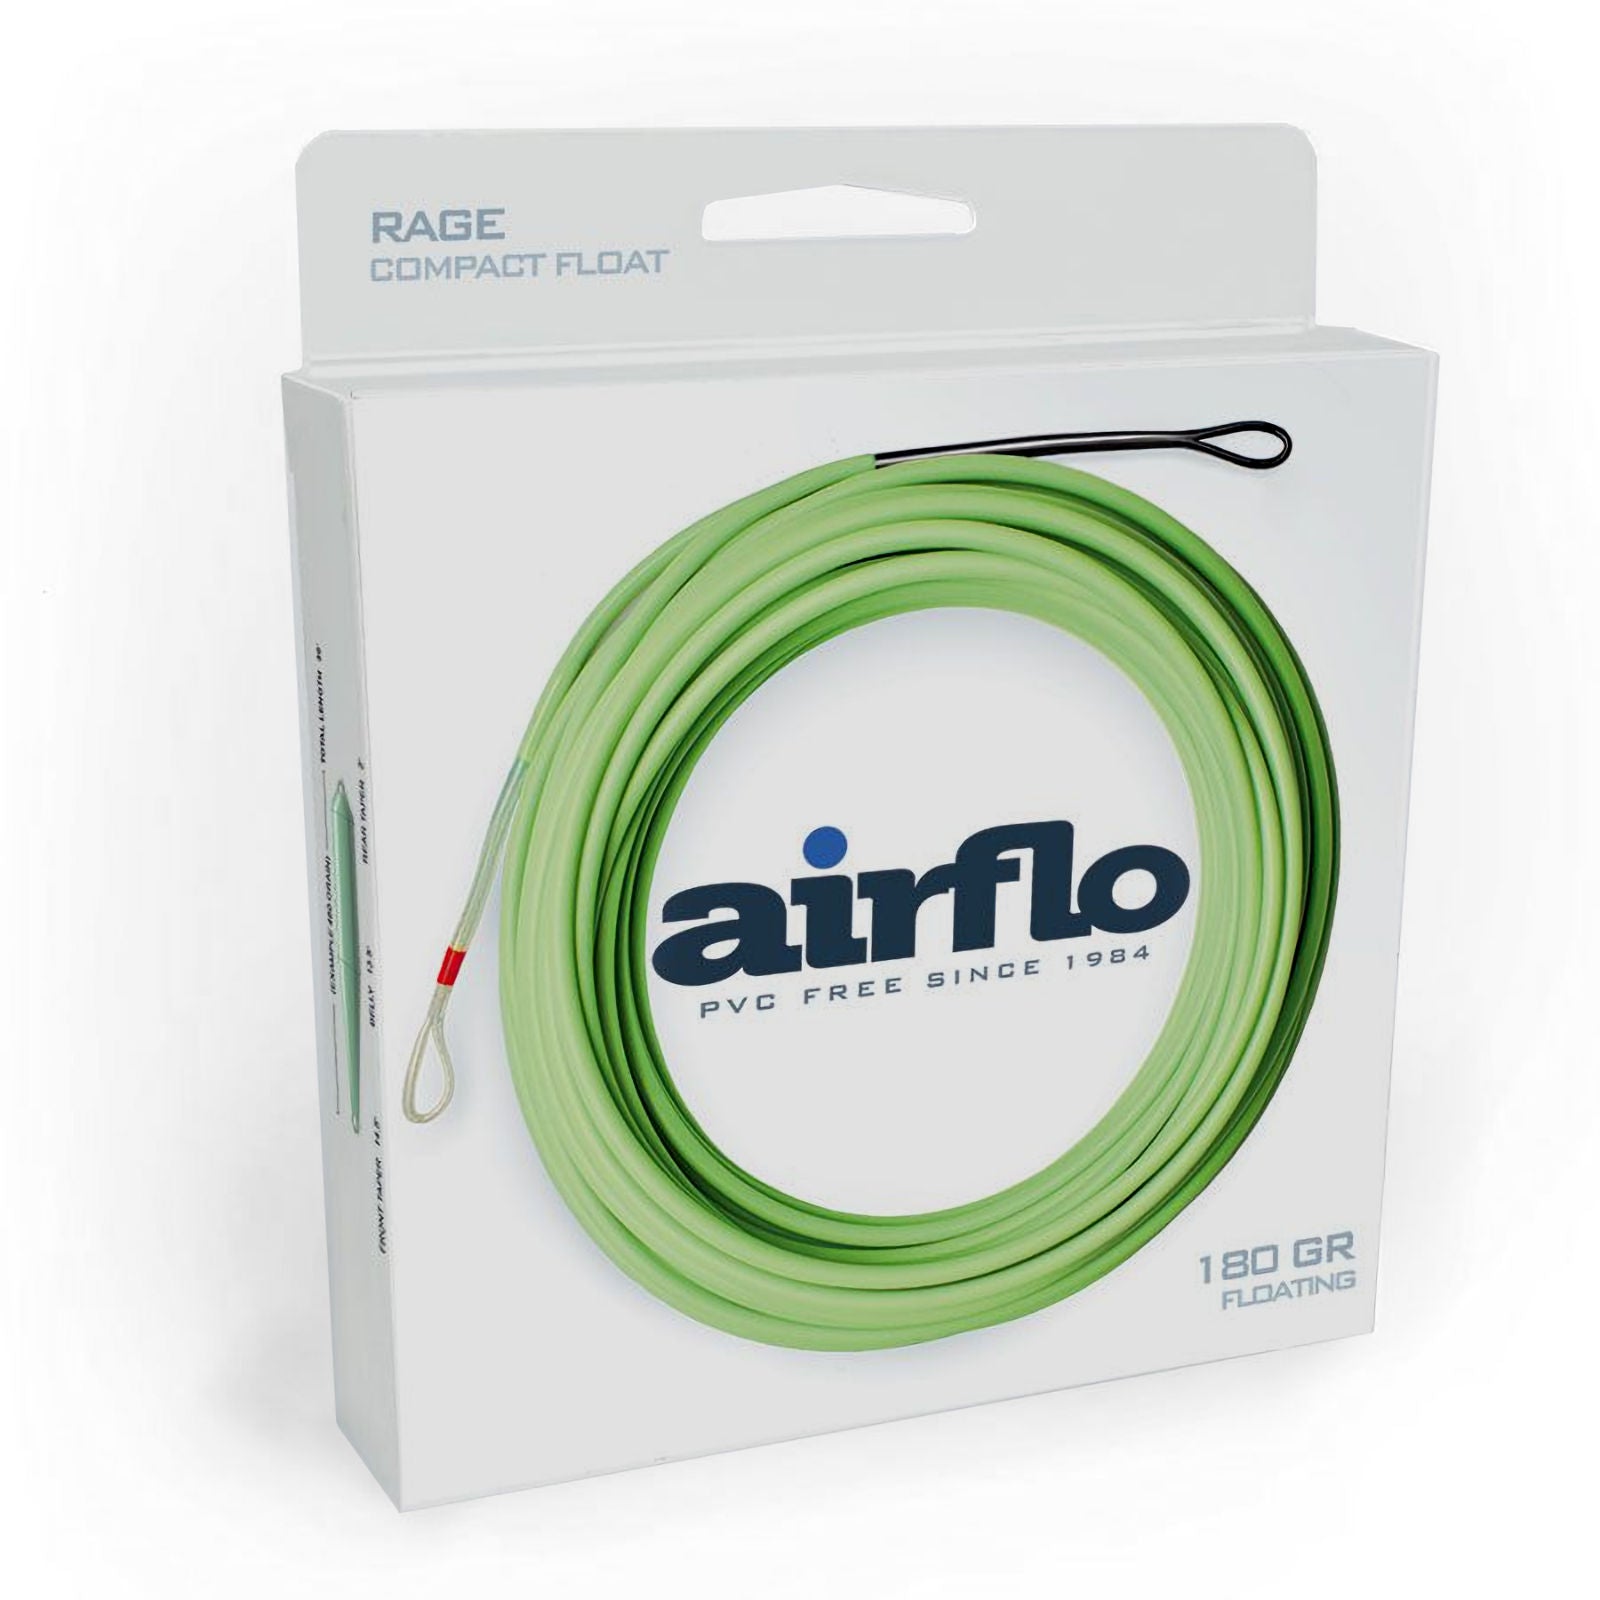 Airflo Rage Compact  Pacific Fly Fishers